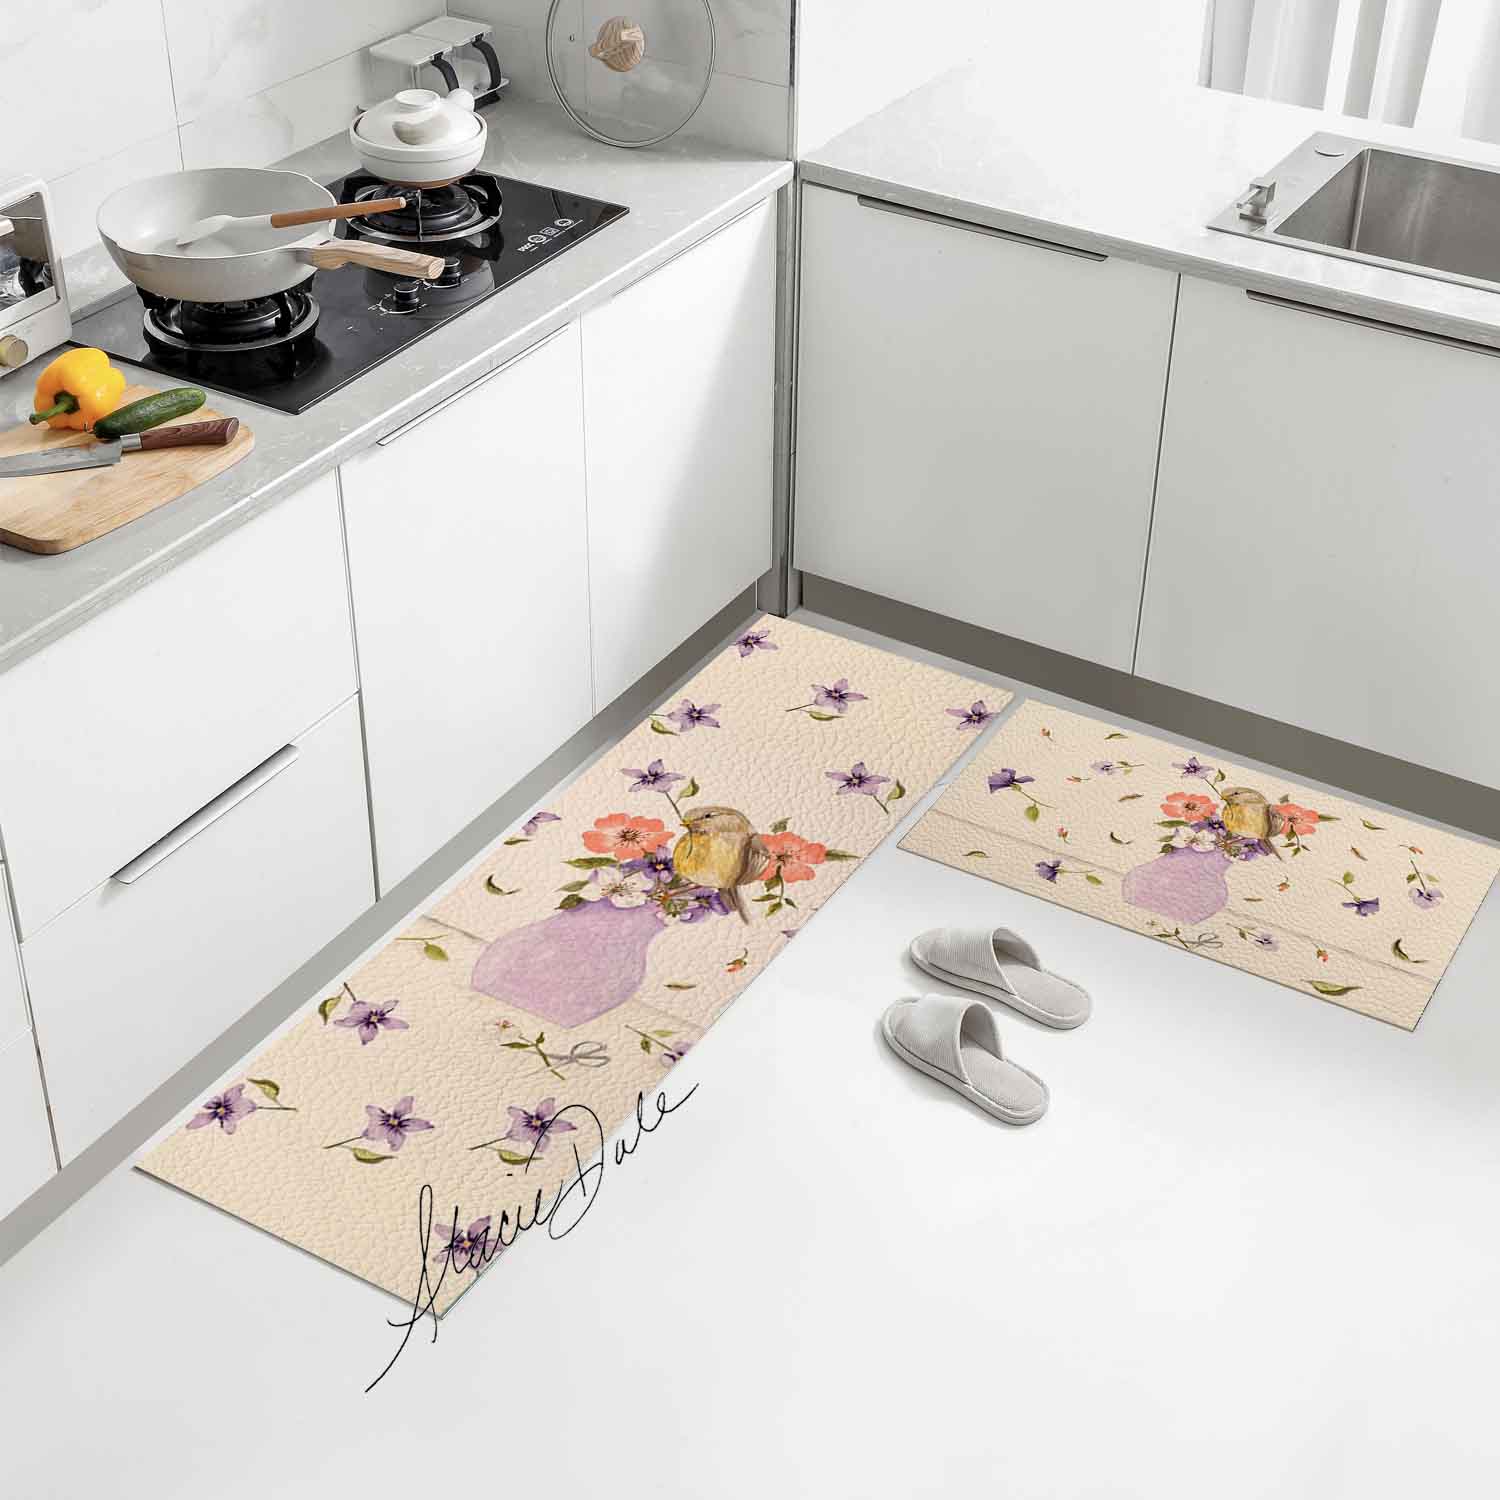 Feblilac Purple Vase Flower and Bird PVC Leather Kitchen Mat by Stacie from US